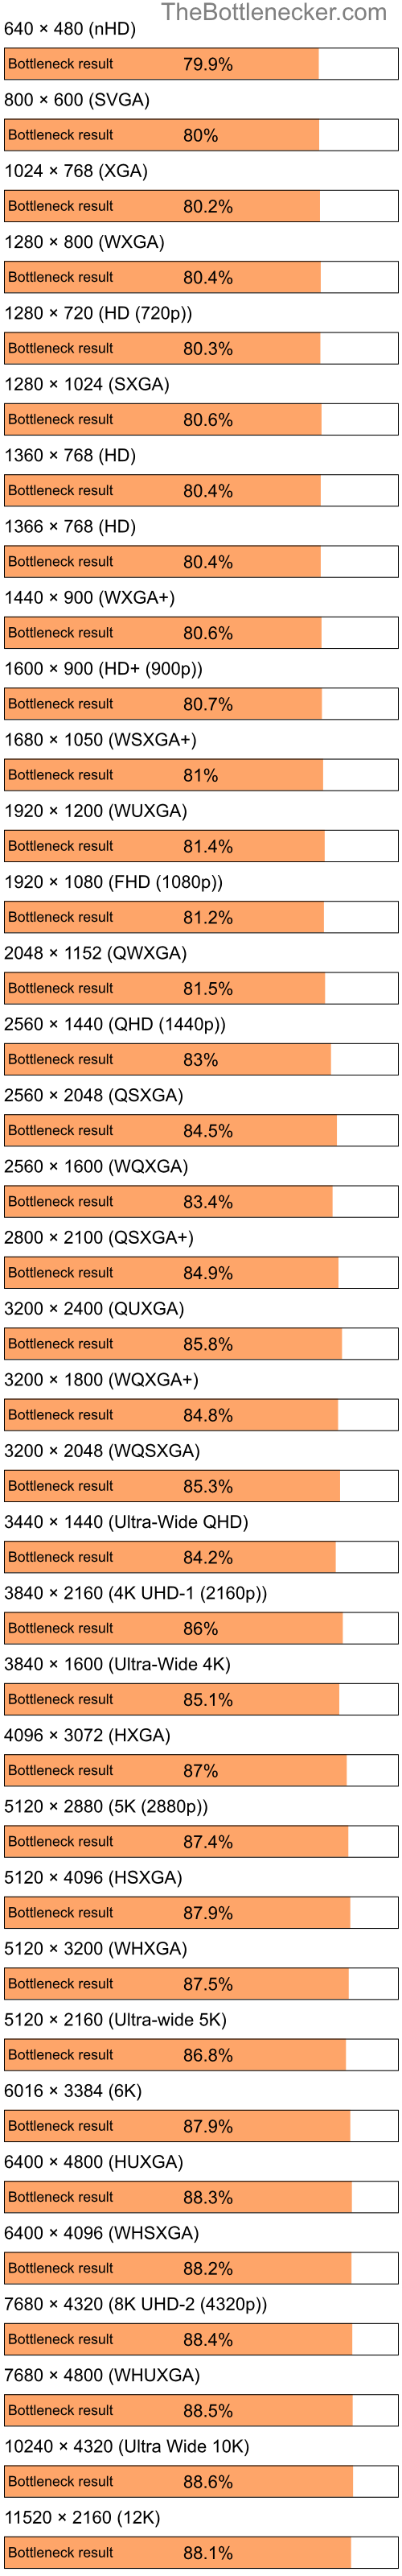 Bottleneck results by resolution for Intel Pentium 4 and NVIDIA GeForce 6200 in Graphic Card Intense Tasks